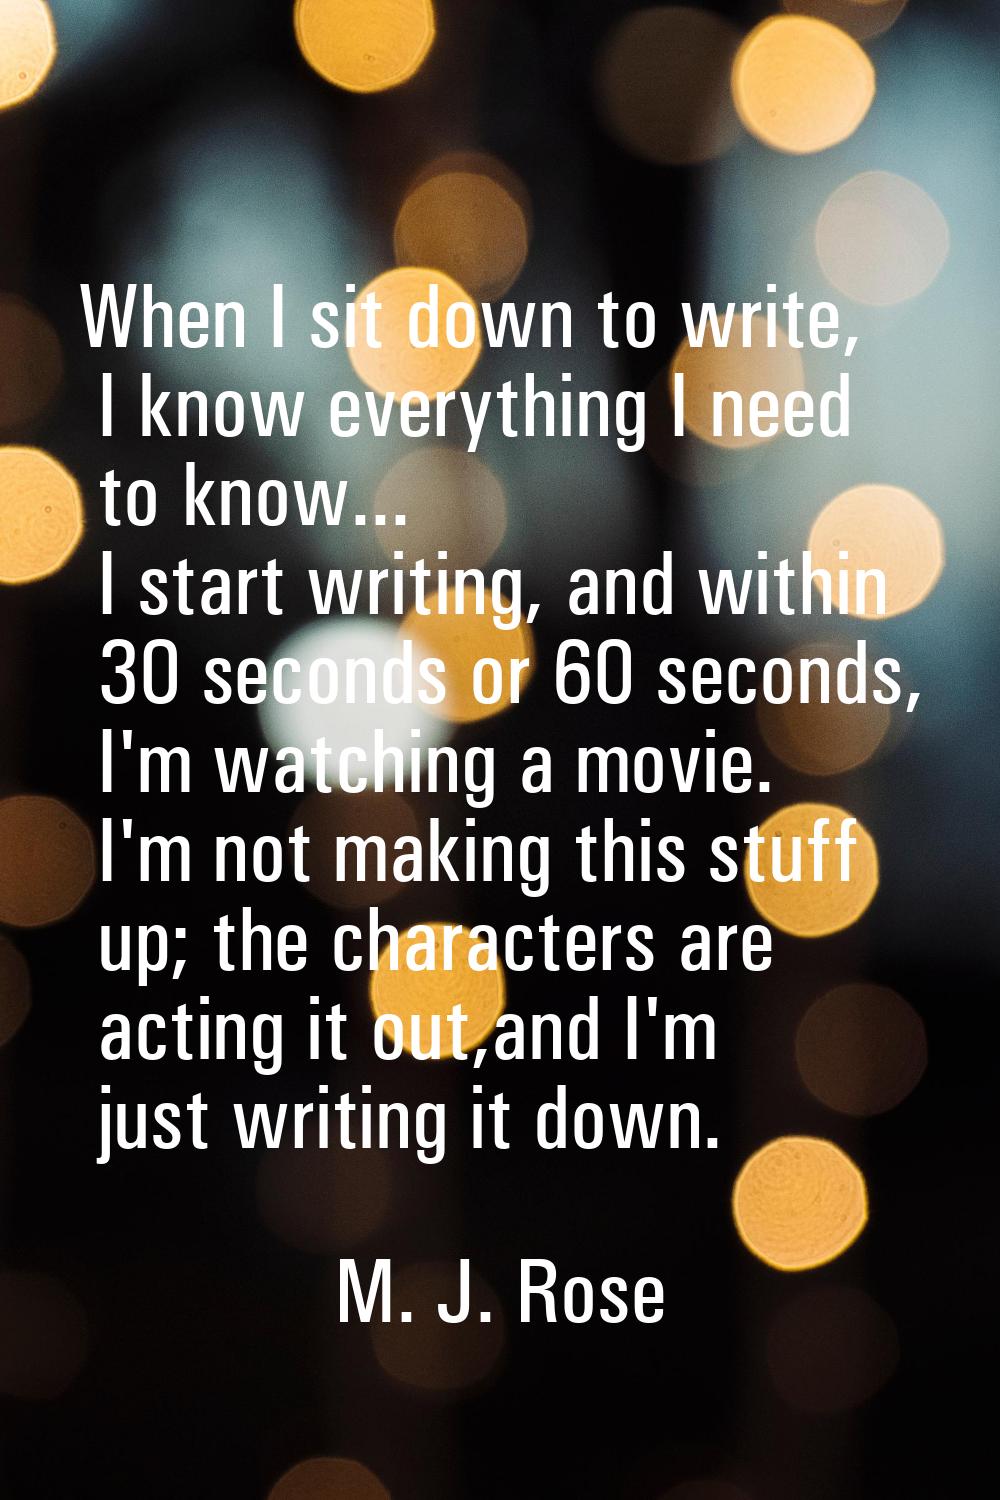 When I sit down to write, I know everything I need to know... I start writing, and within 30 second